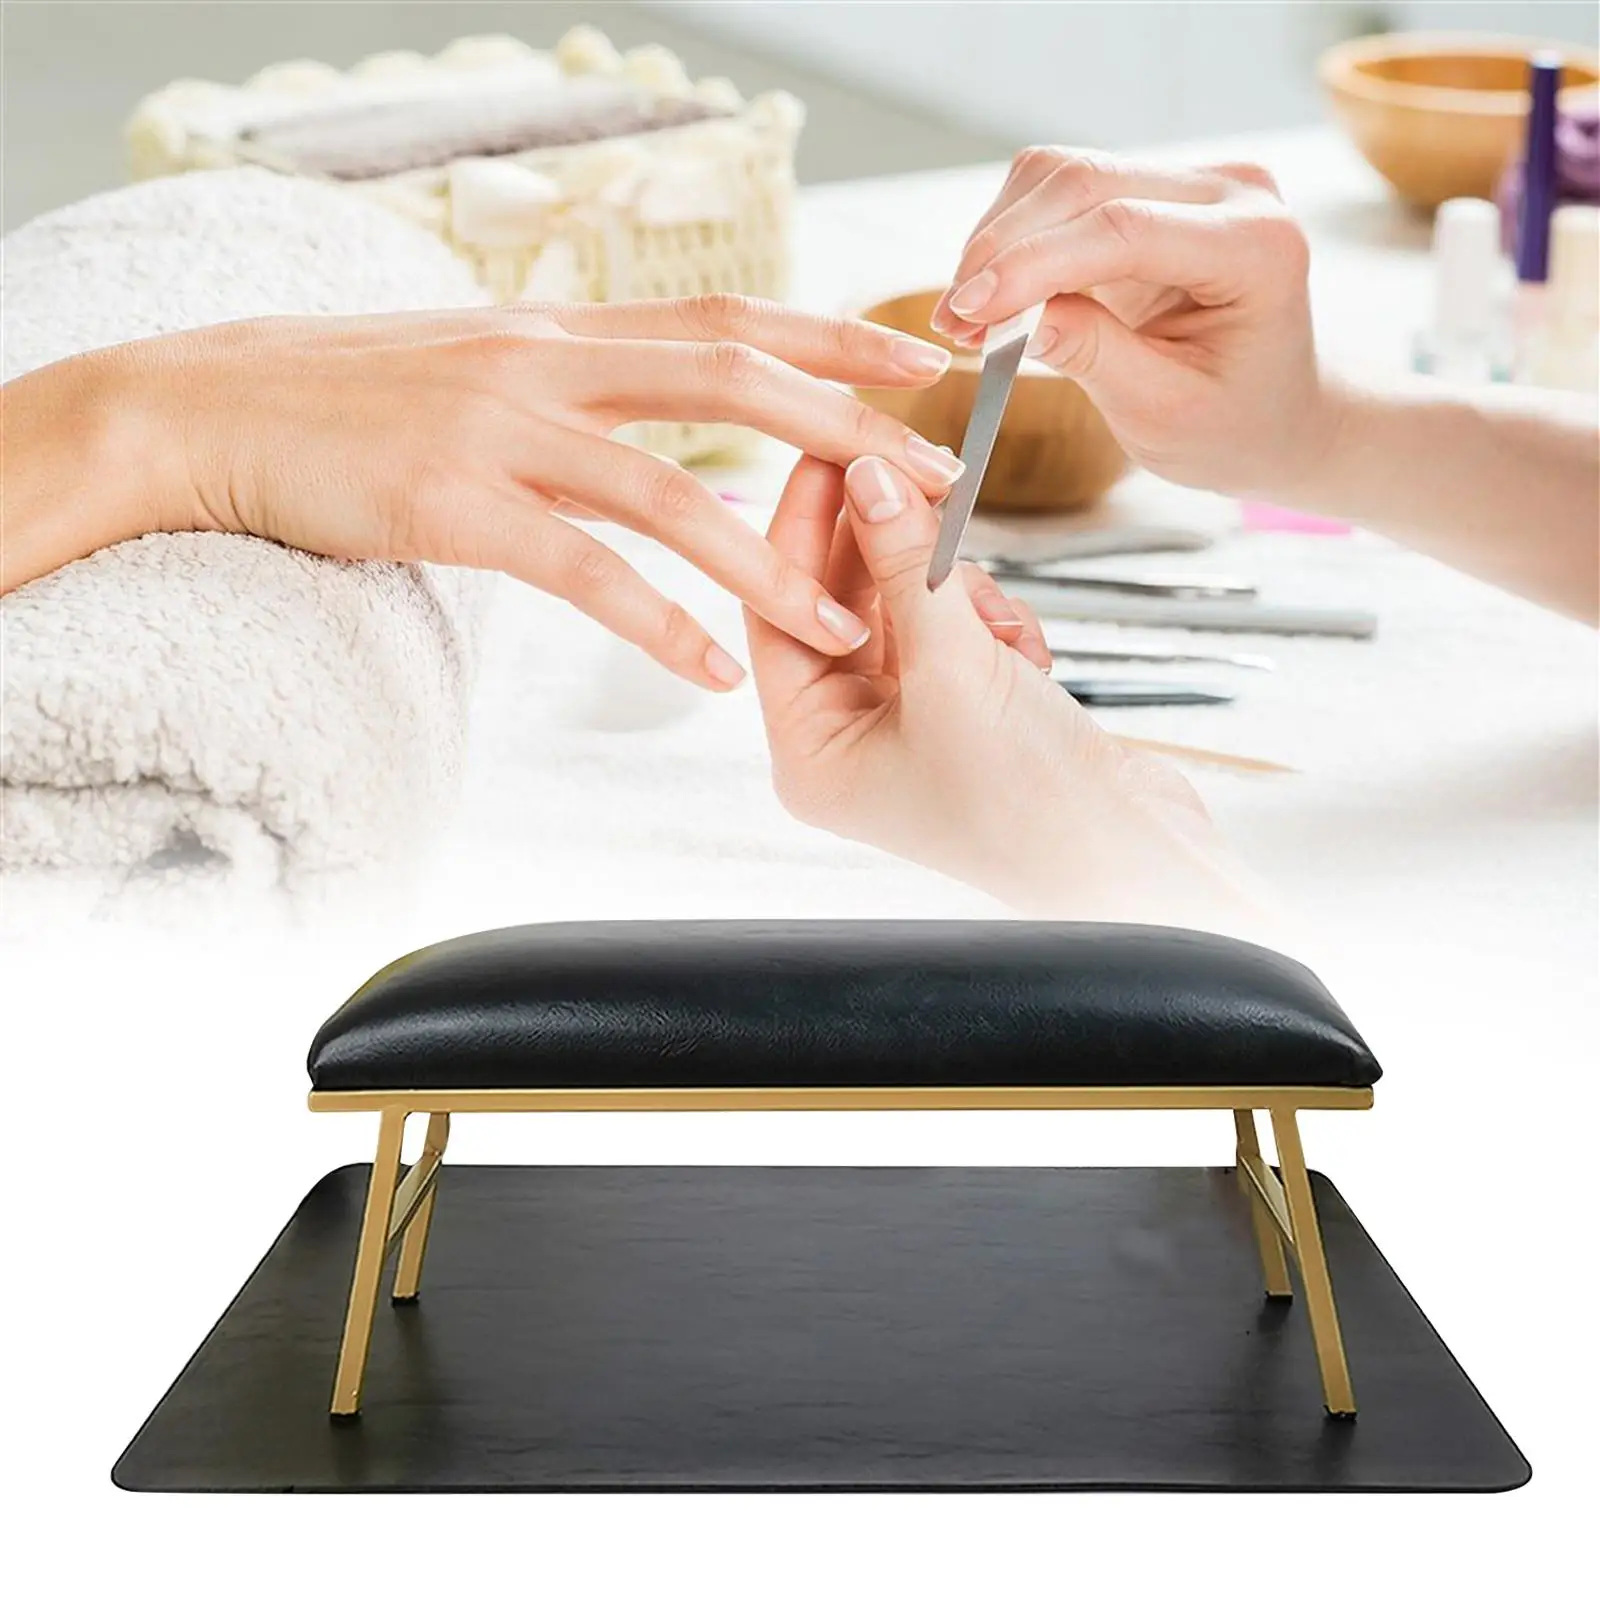 Nail Art Hand Pillow and Mat Professional PU Leather Table Soft Wrist Arm Pad Nail Hand Rest for Salon Home Nail Technician Use